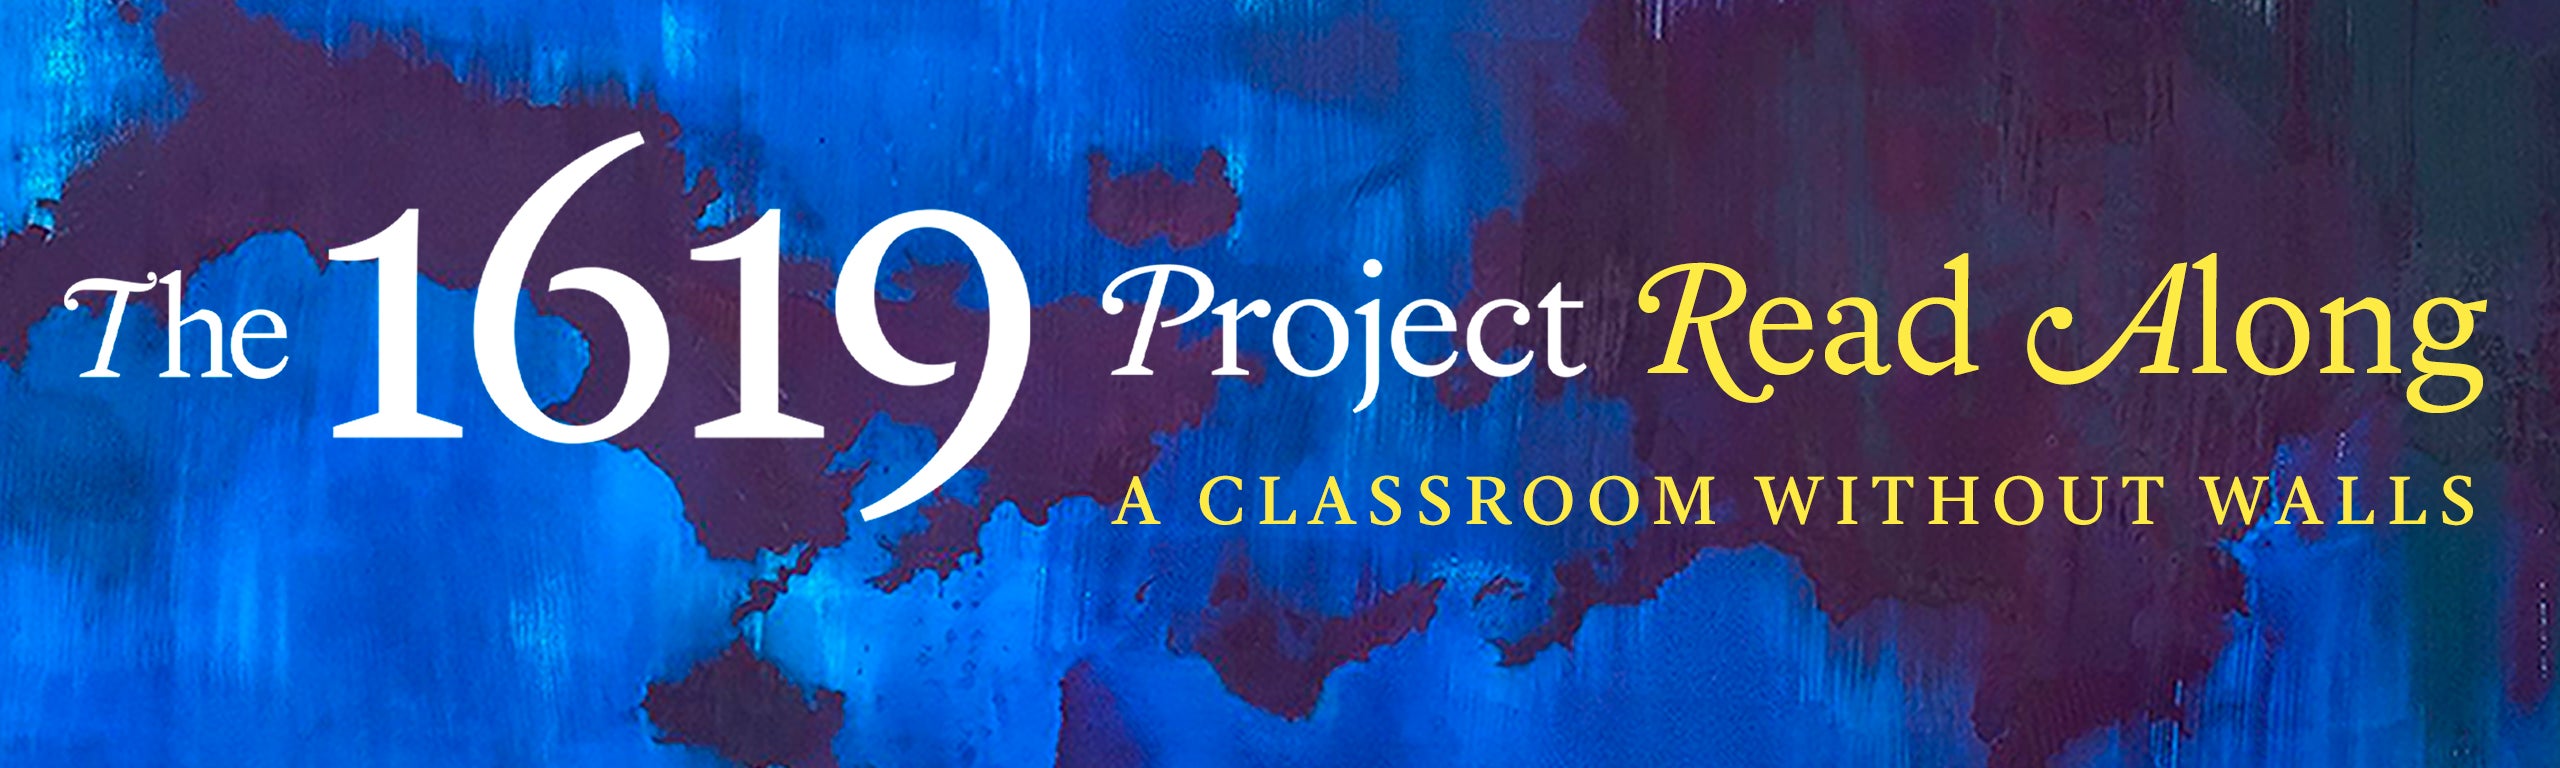 The 1619 Project Read Along